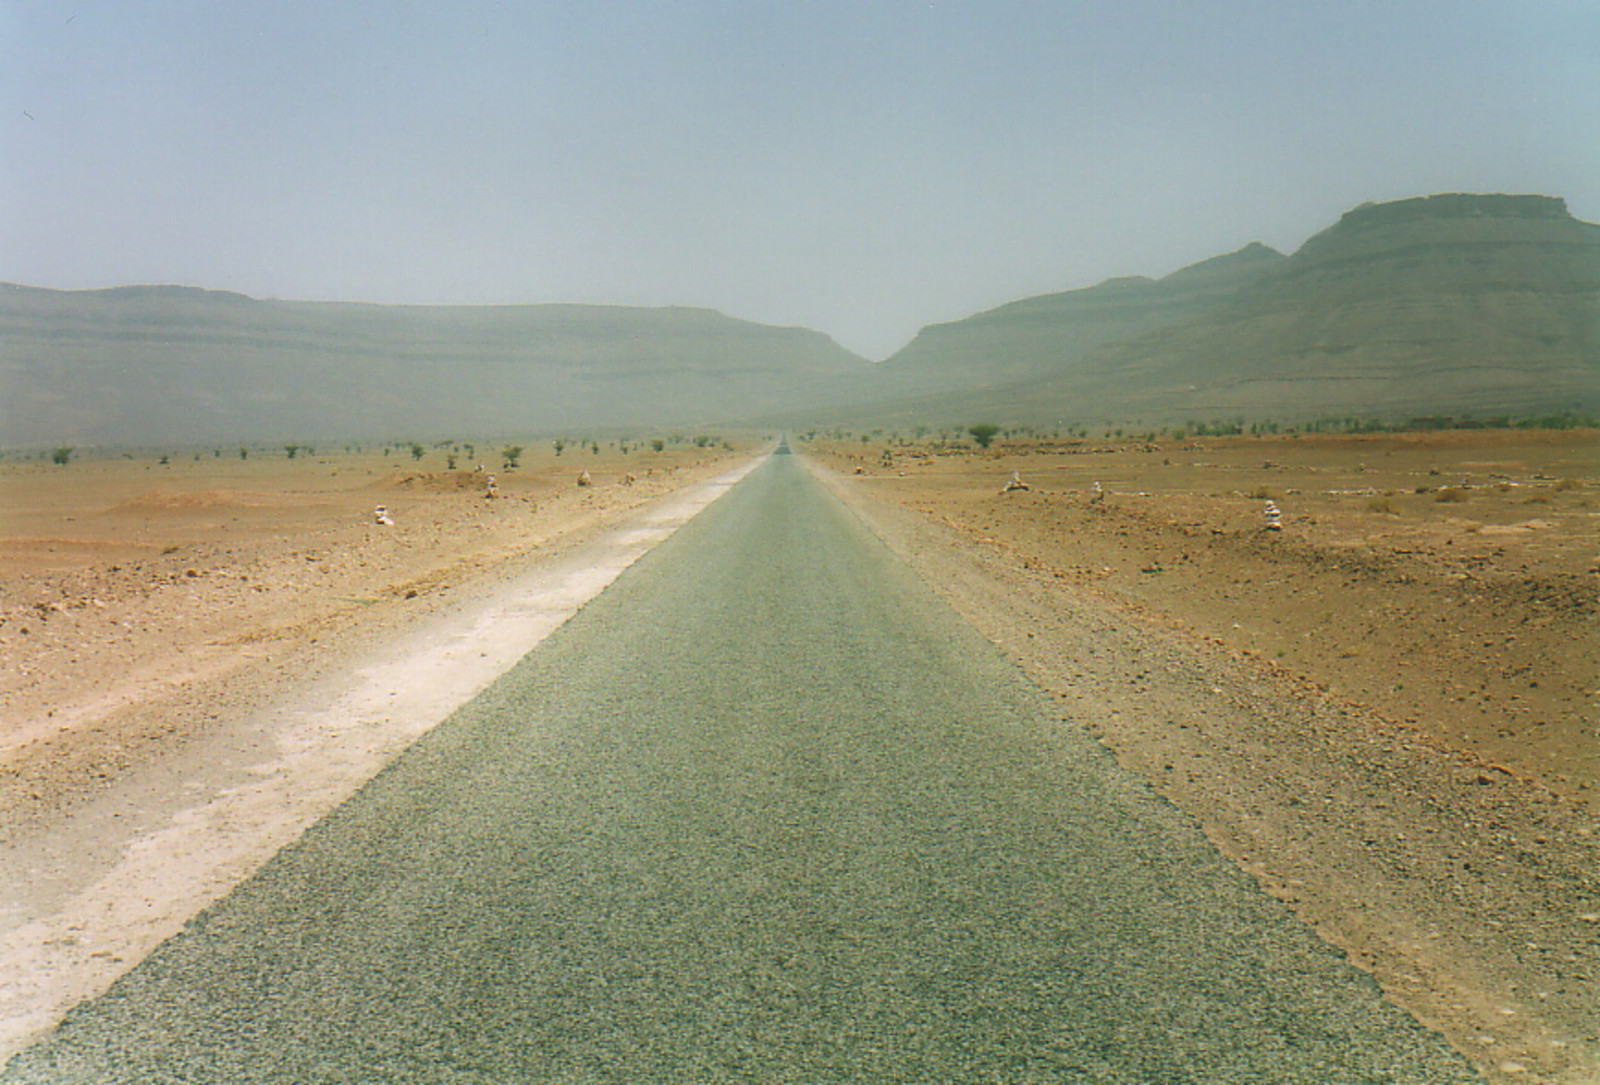 A road disappearing into the distance